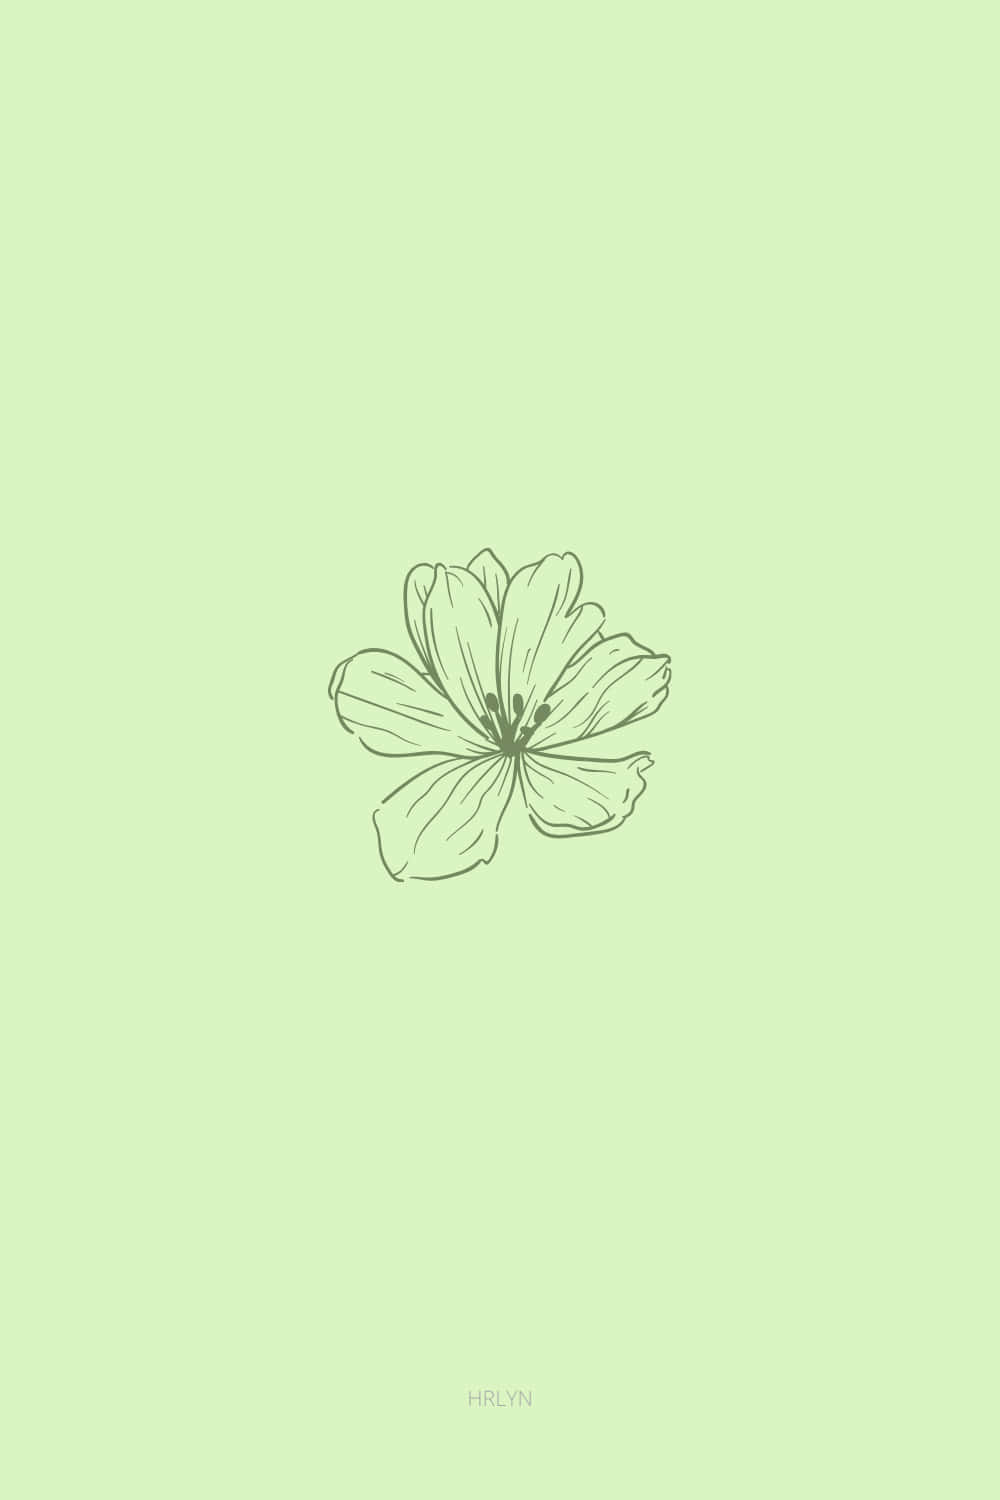 Cute Sage Green Flower Drawn On The Center